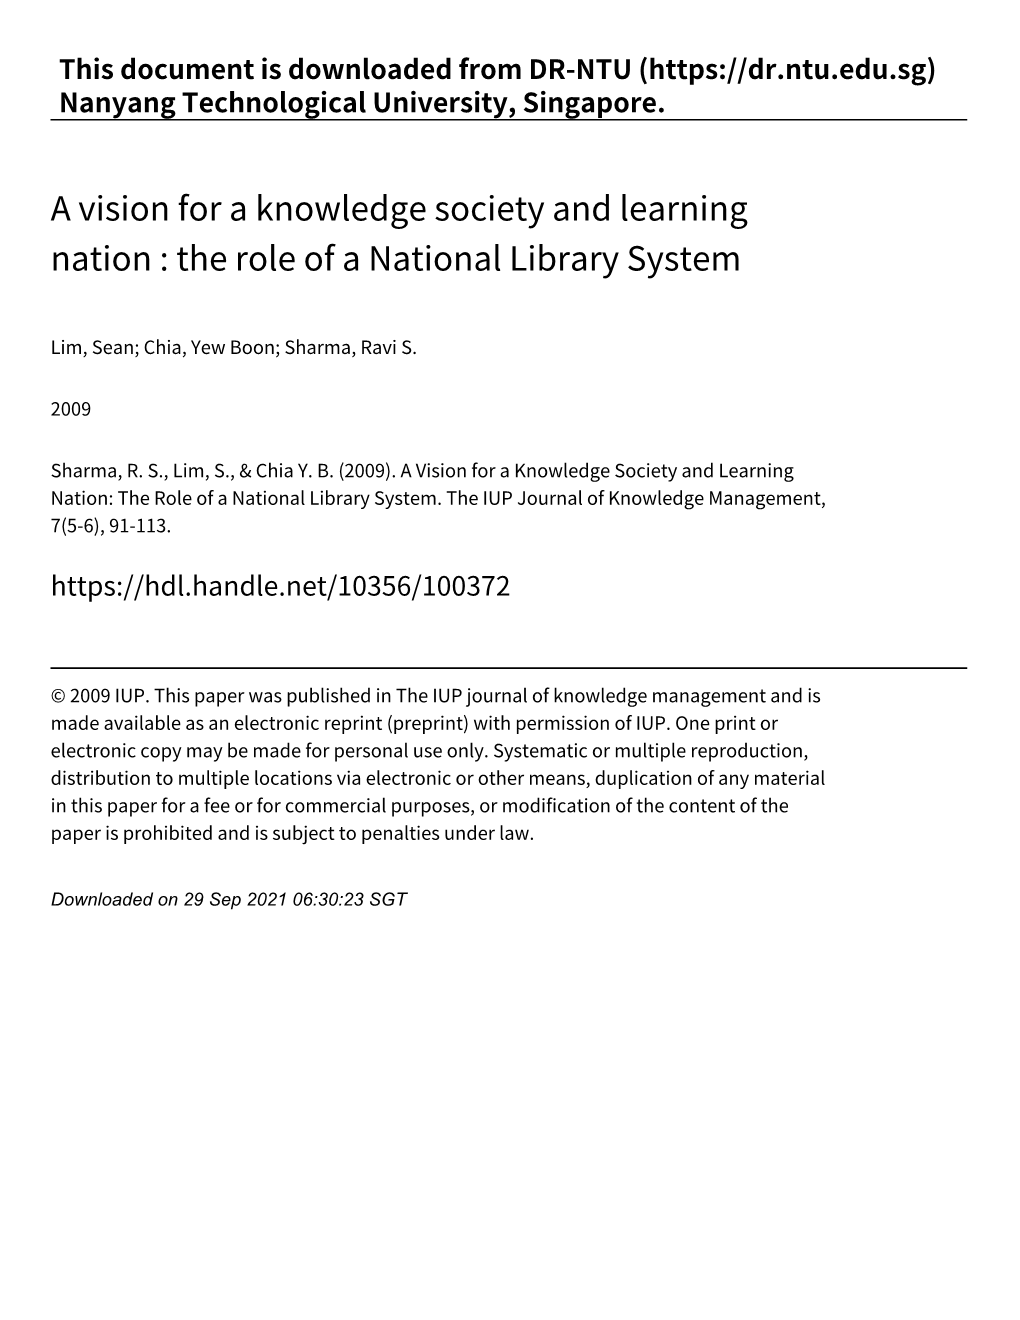 A Vision for a Knowledge Society and Learning Nation : the Role of a National Library System